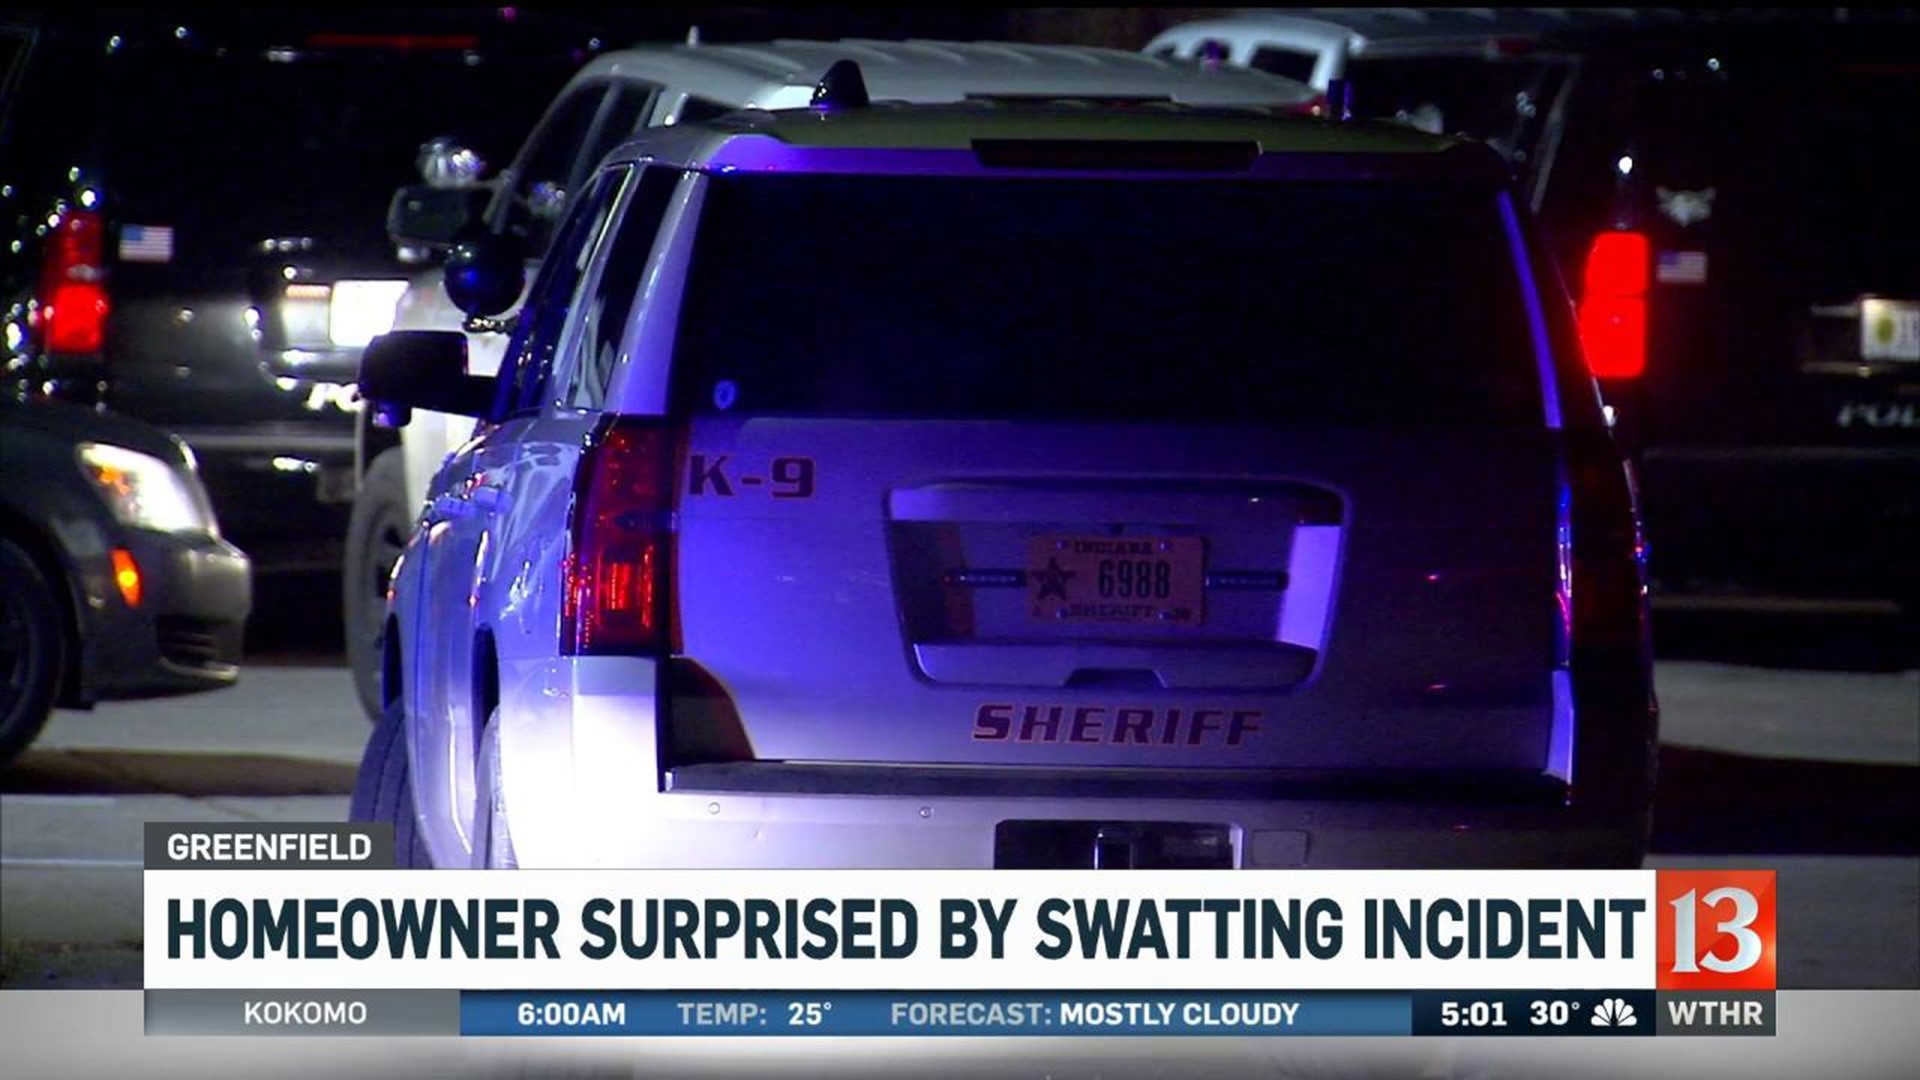 Homeowner surprised by swatting incident